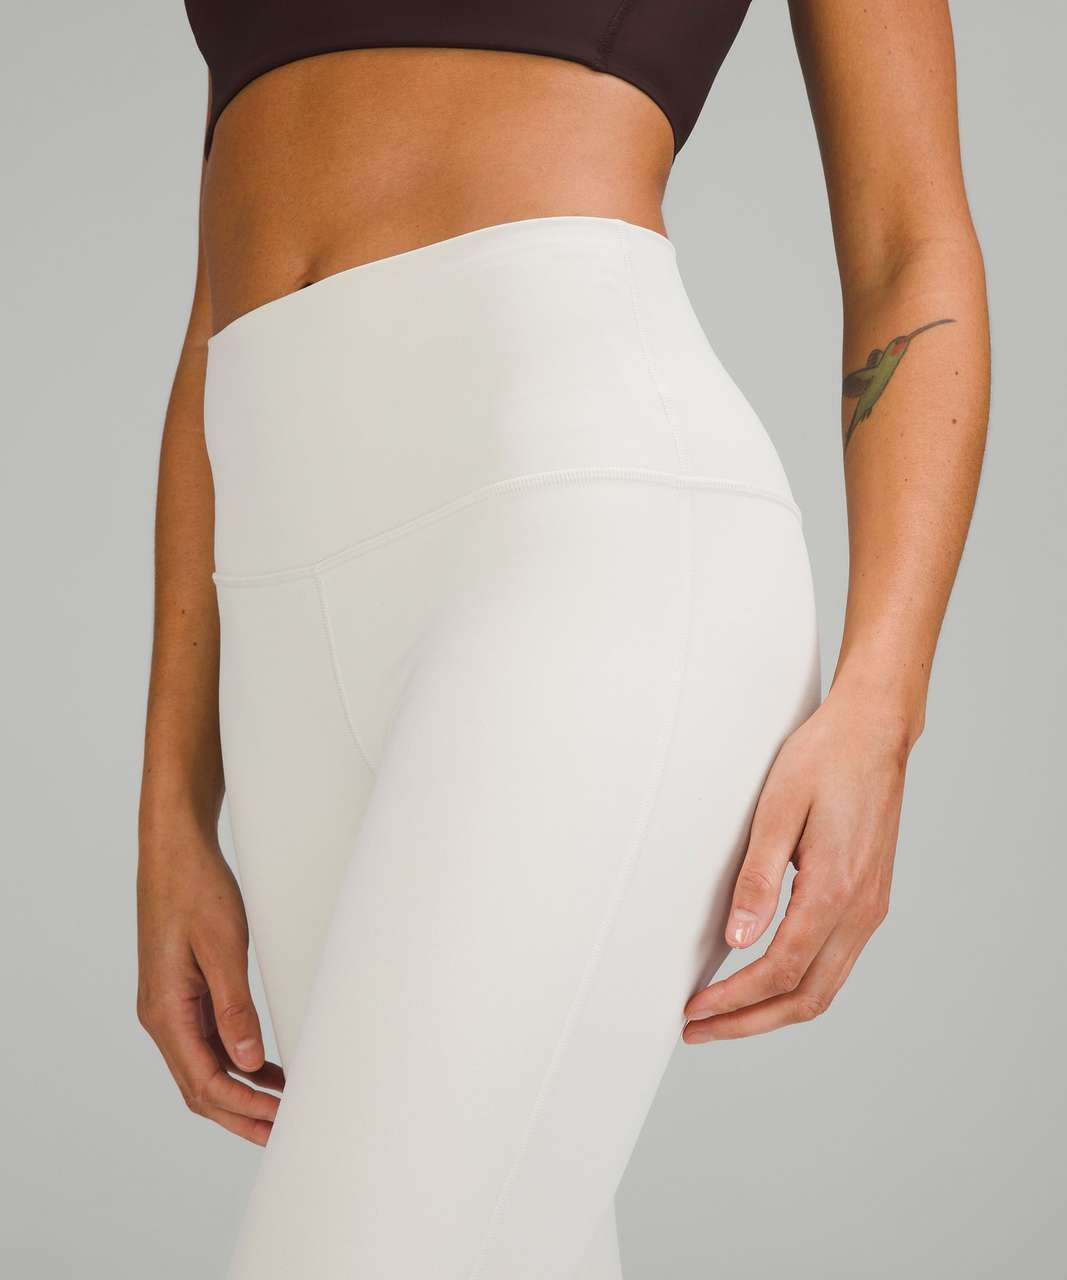 Lululemon Outfit in color Bone featuring align leggings and softstreme